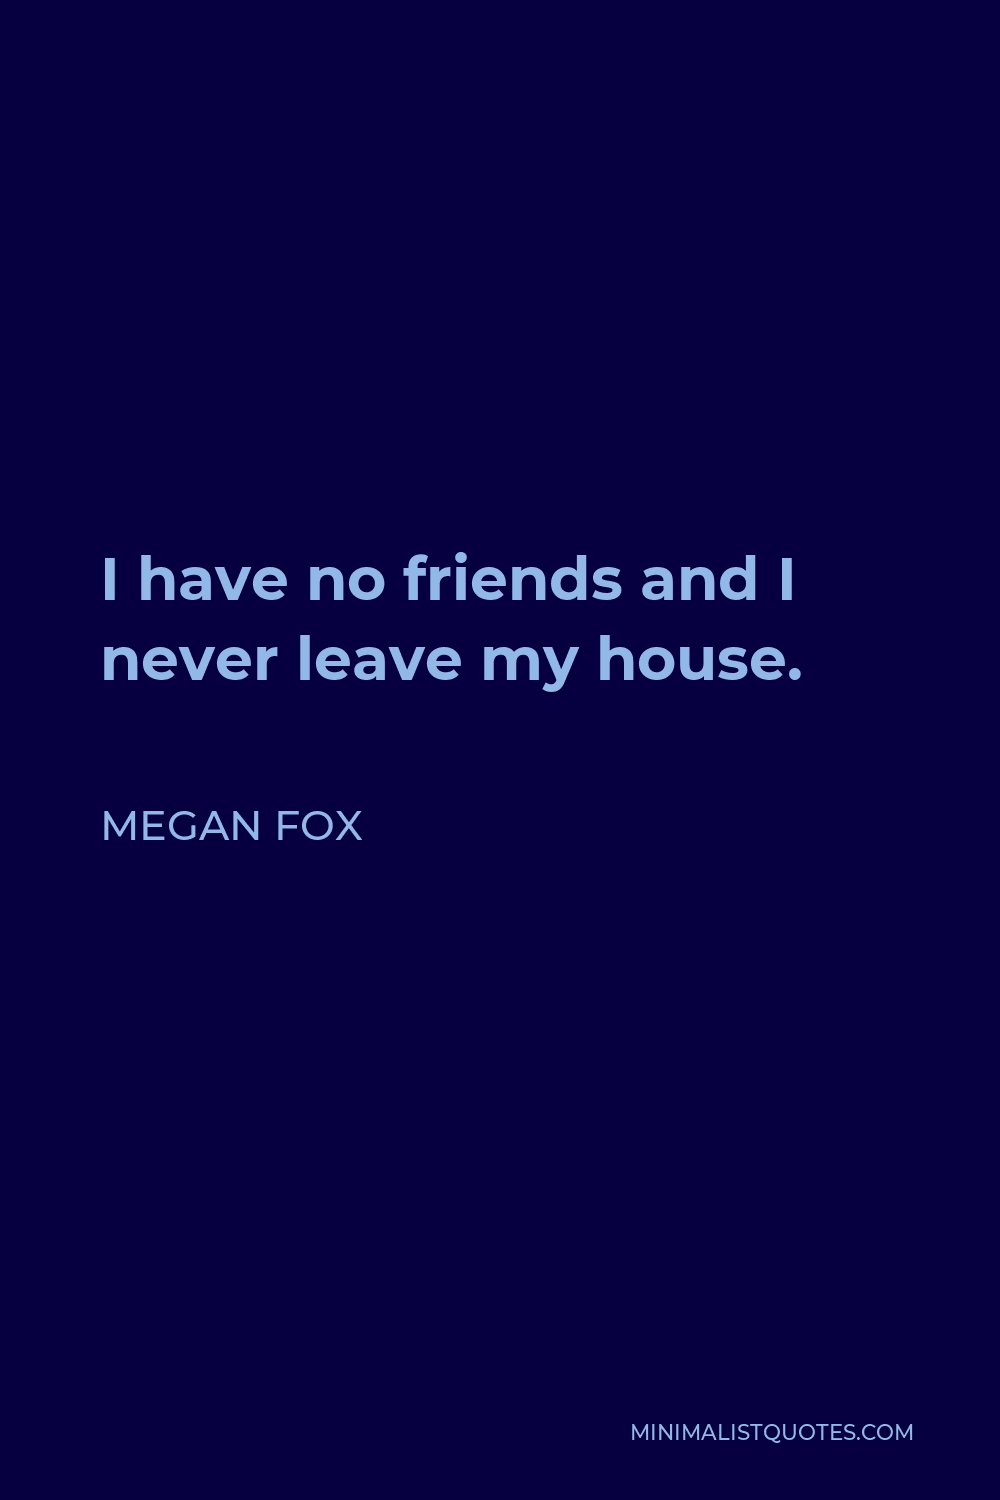 Megan Fox Quote - I have no friends and I never leave my house.